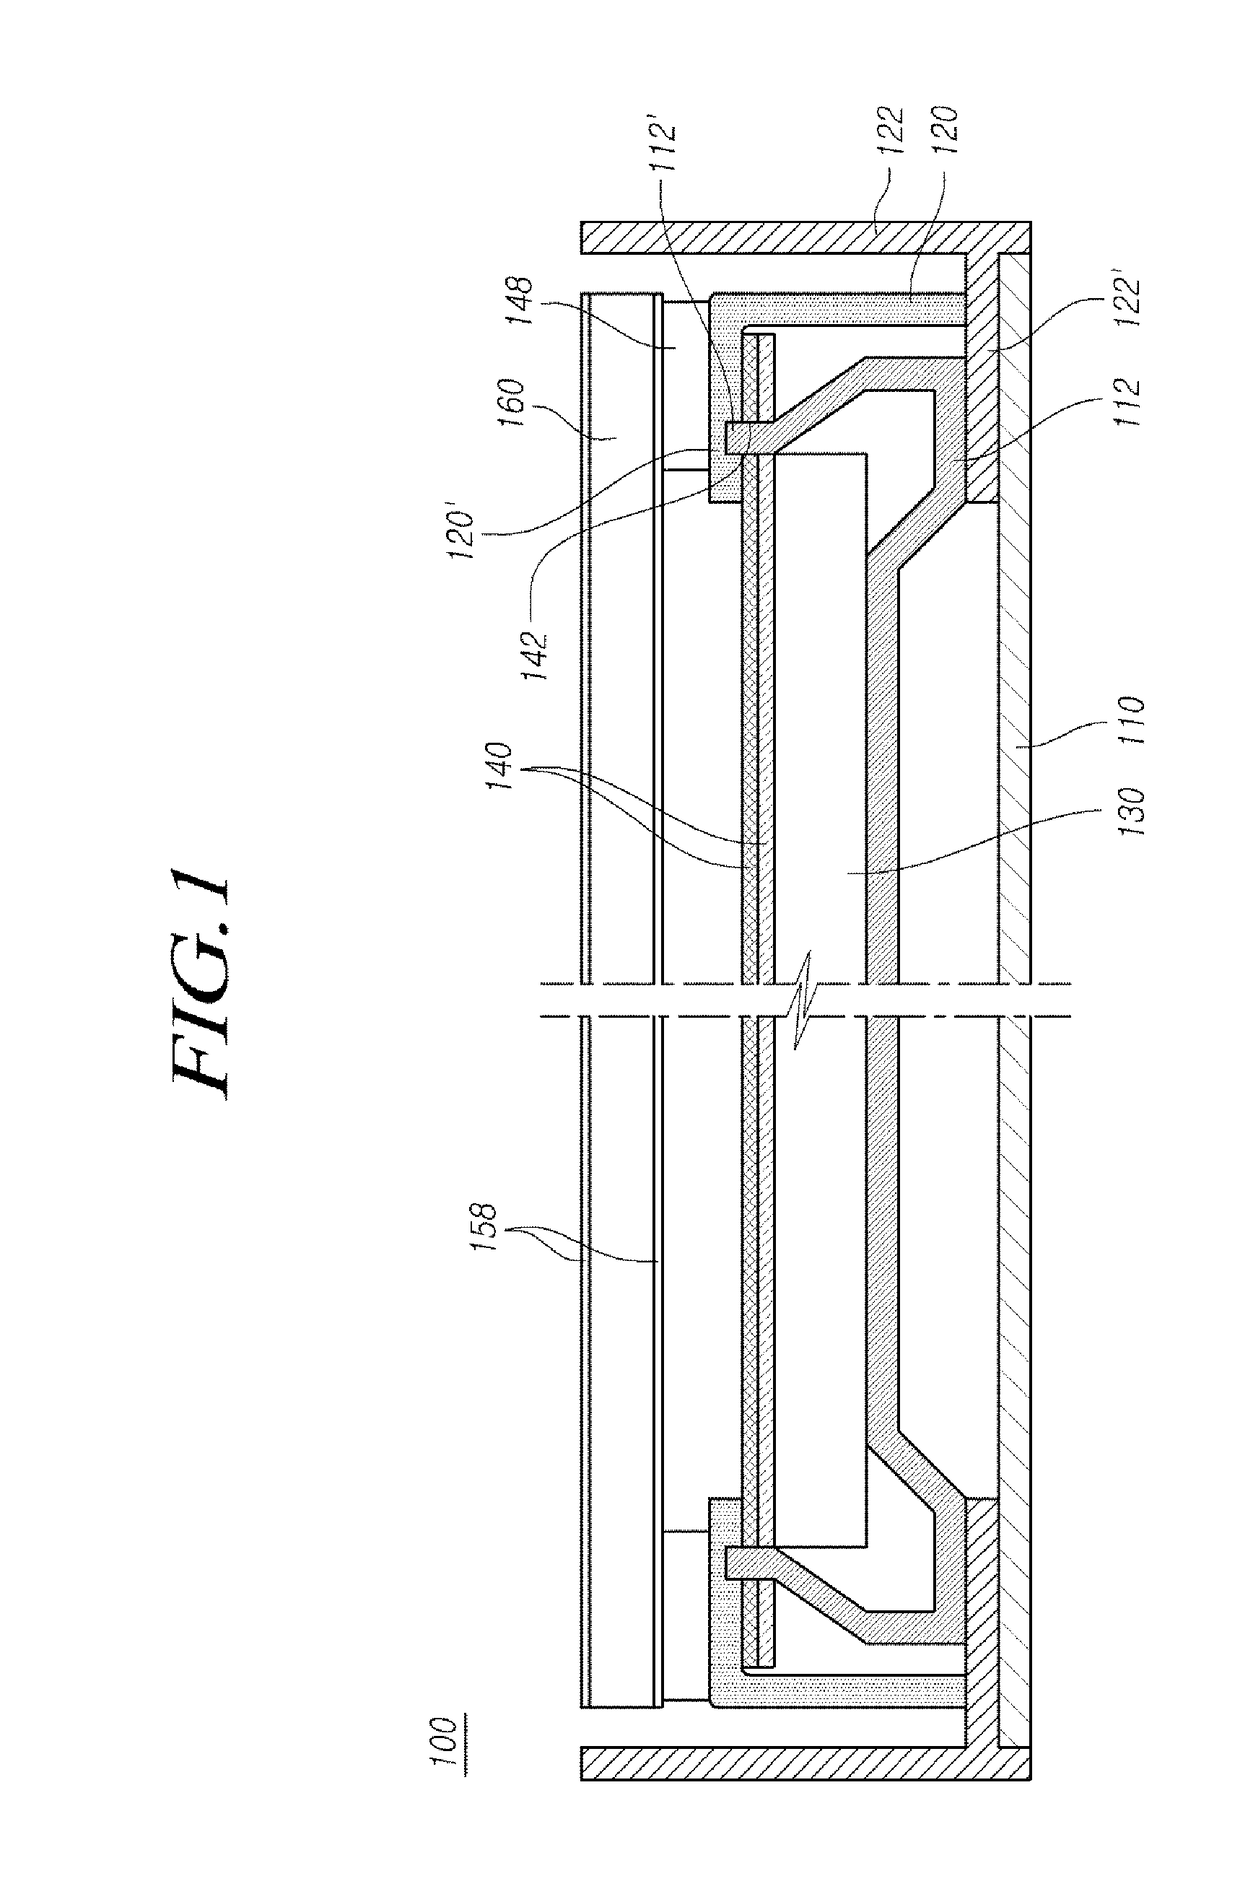 Liquid crystal display device comprising a screw-shaped combining member affixing a middle frame to a cover bottom through a first groove of a contacting portion